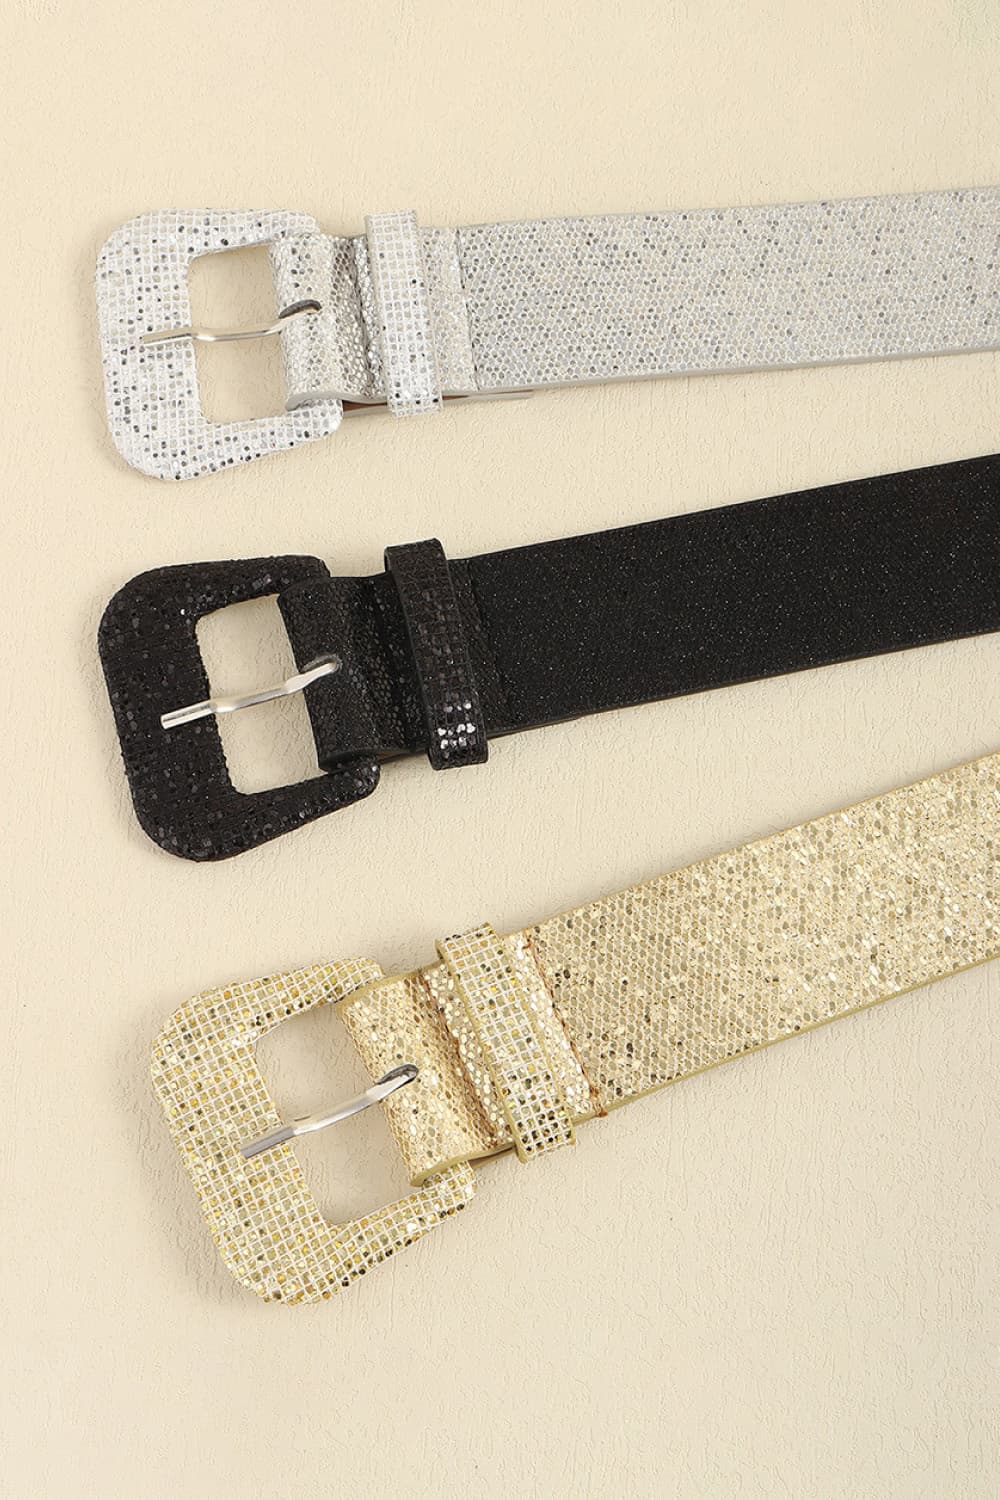 All The Rock Stars 70s Glam PU Leather Glitter Belt in Black, Gold, and Silver